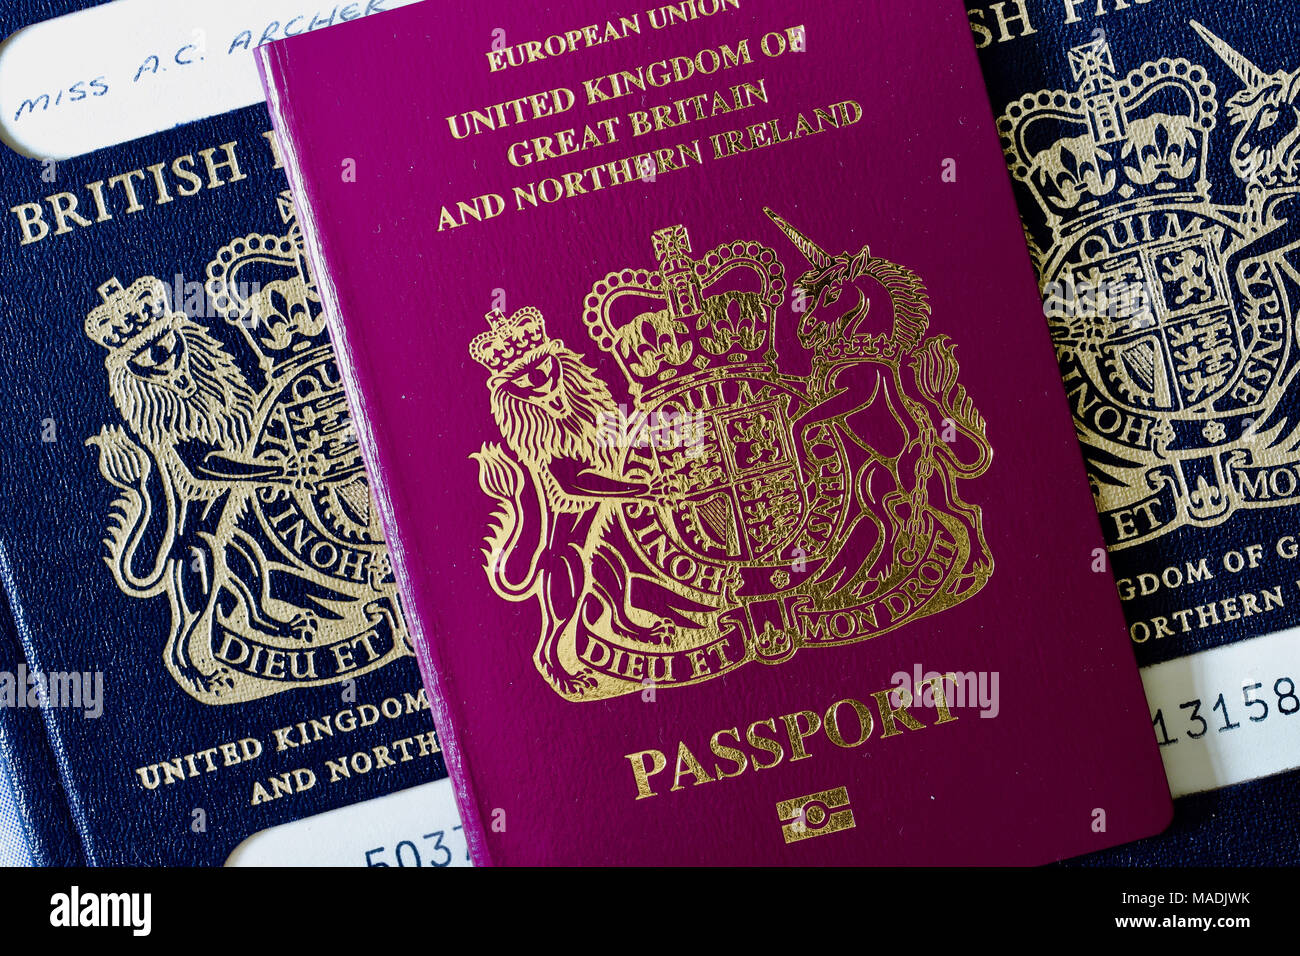 British identity and nostalgia for the past. The old blue British passport and the current red EU version which is under threat from Brexit. Stock Photo